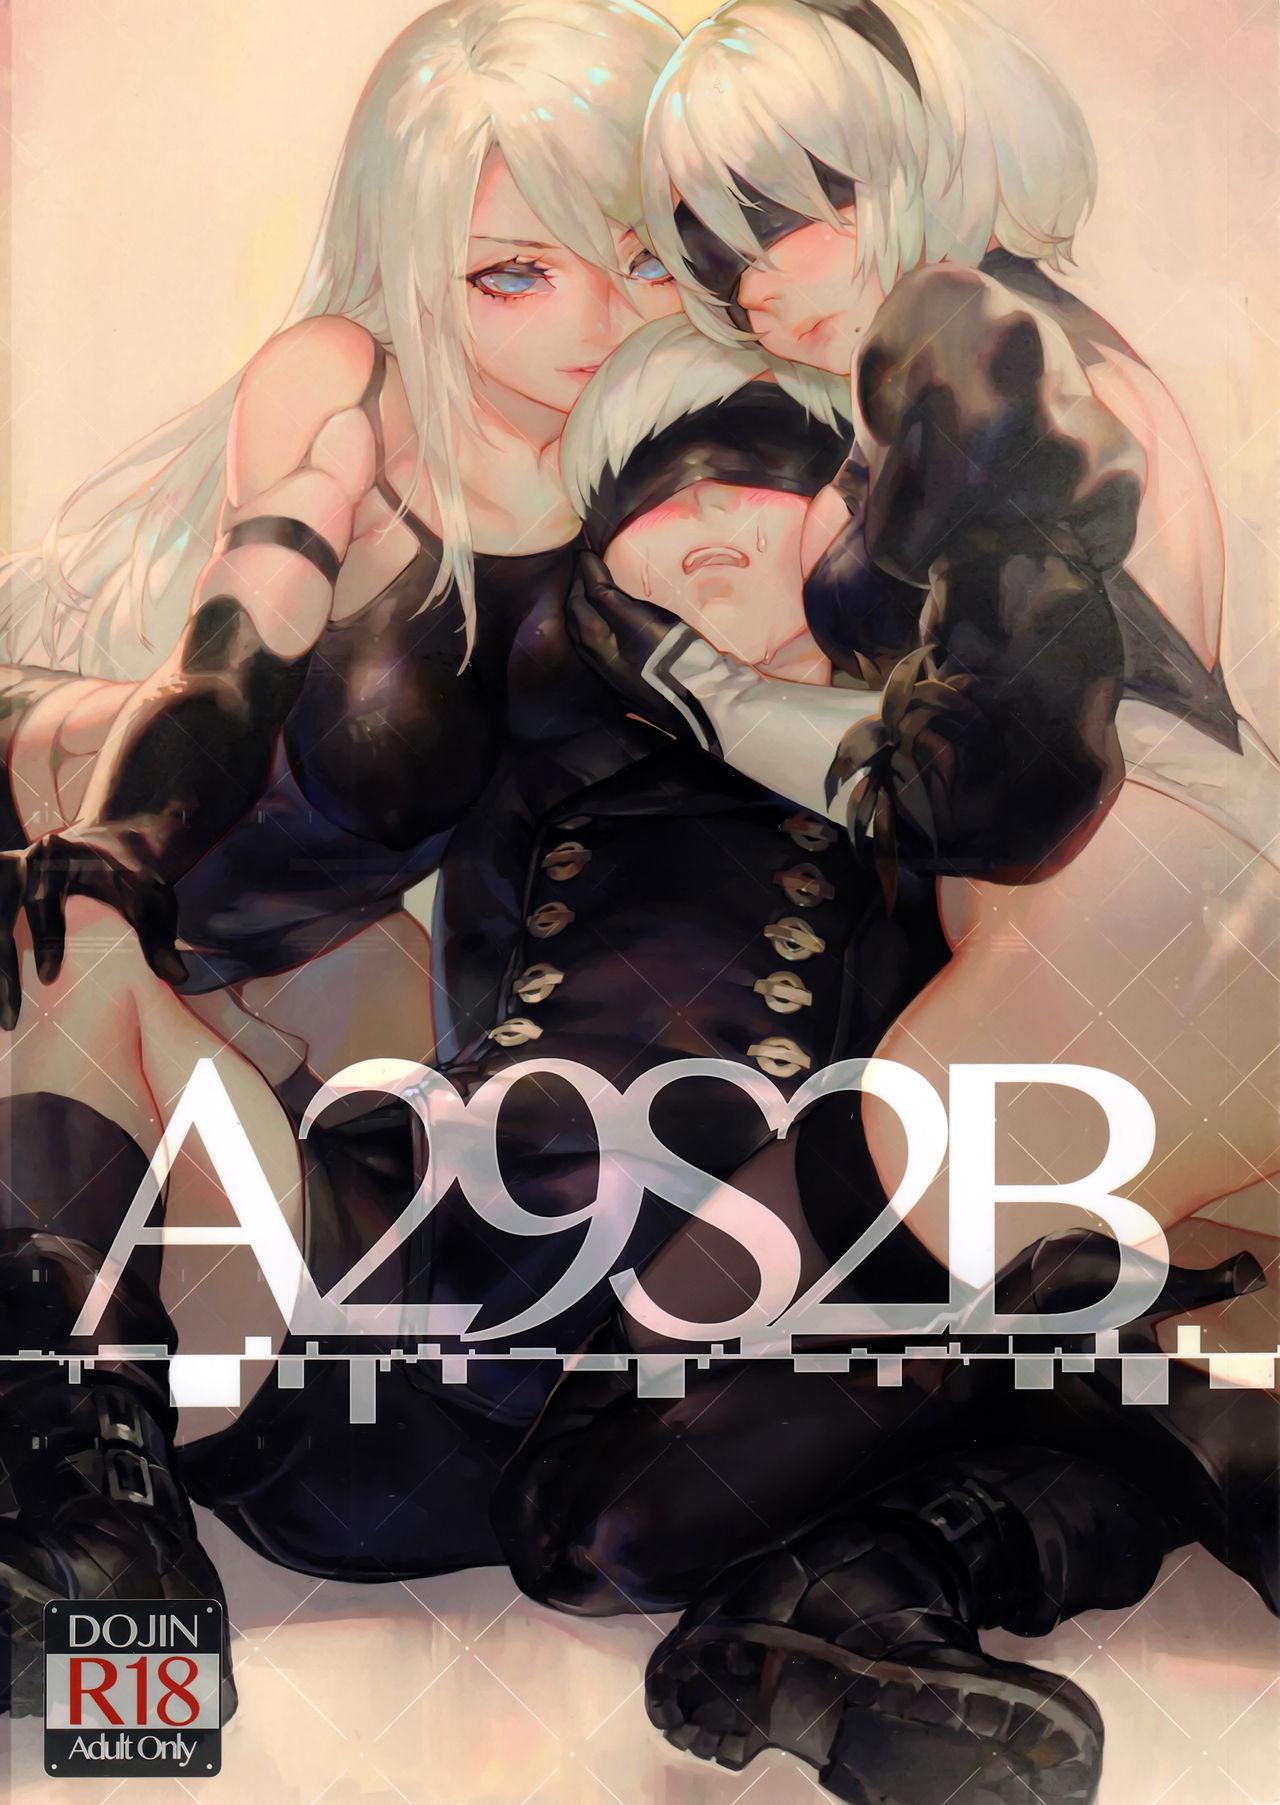 Cousin A29S2B - Nier automata Stockings - Picture 1